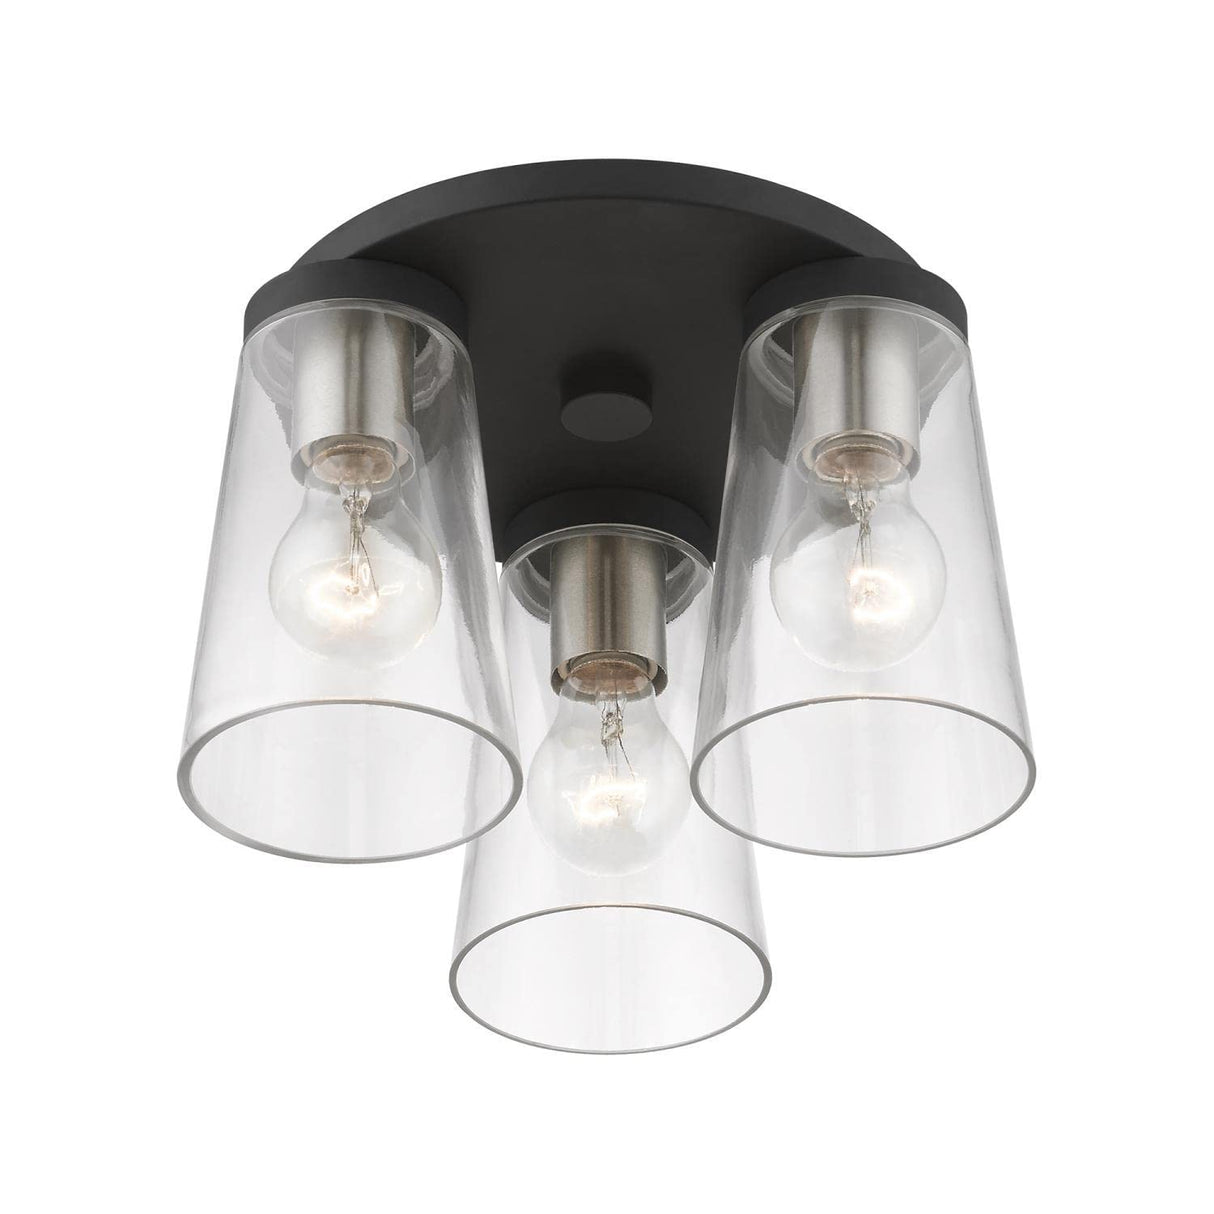 Cityview 3 Light Flush Mount in Black with Brushed Nickel (46712-04)